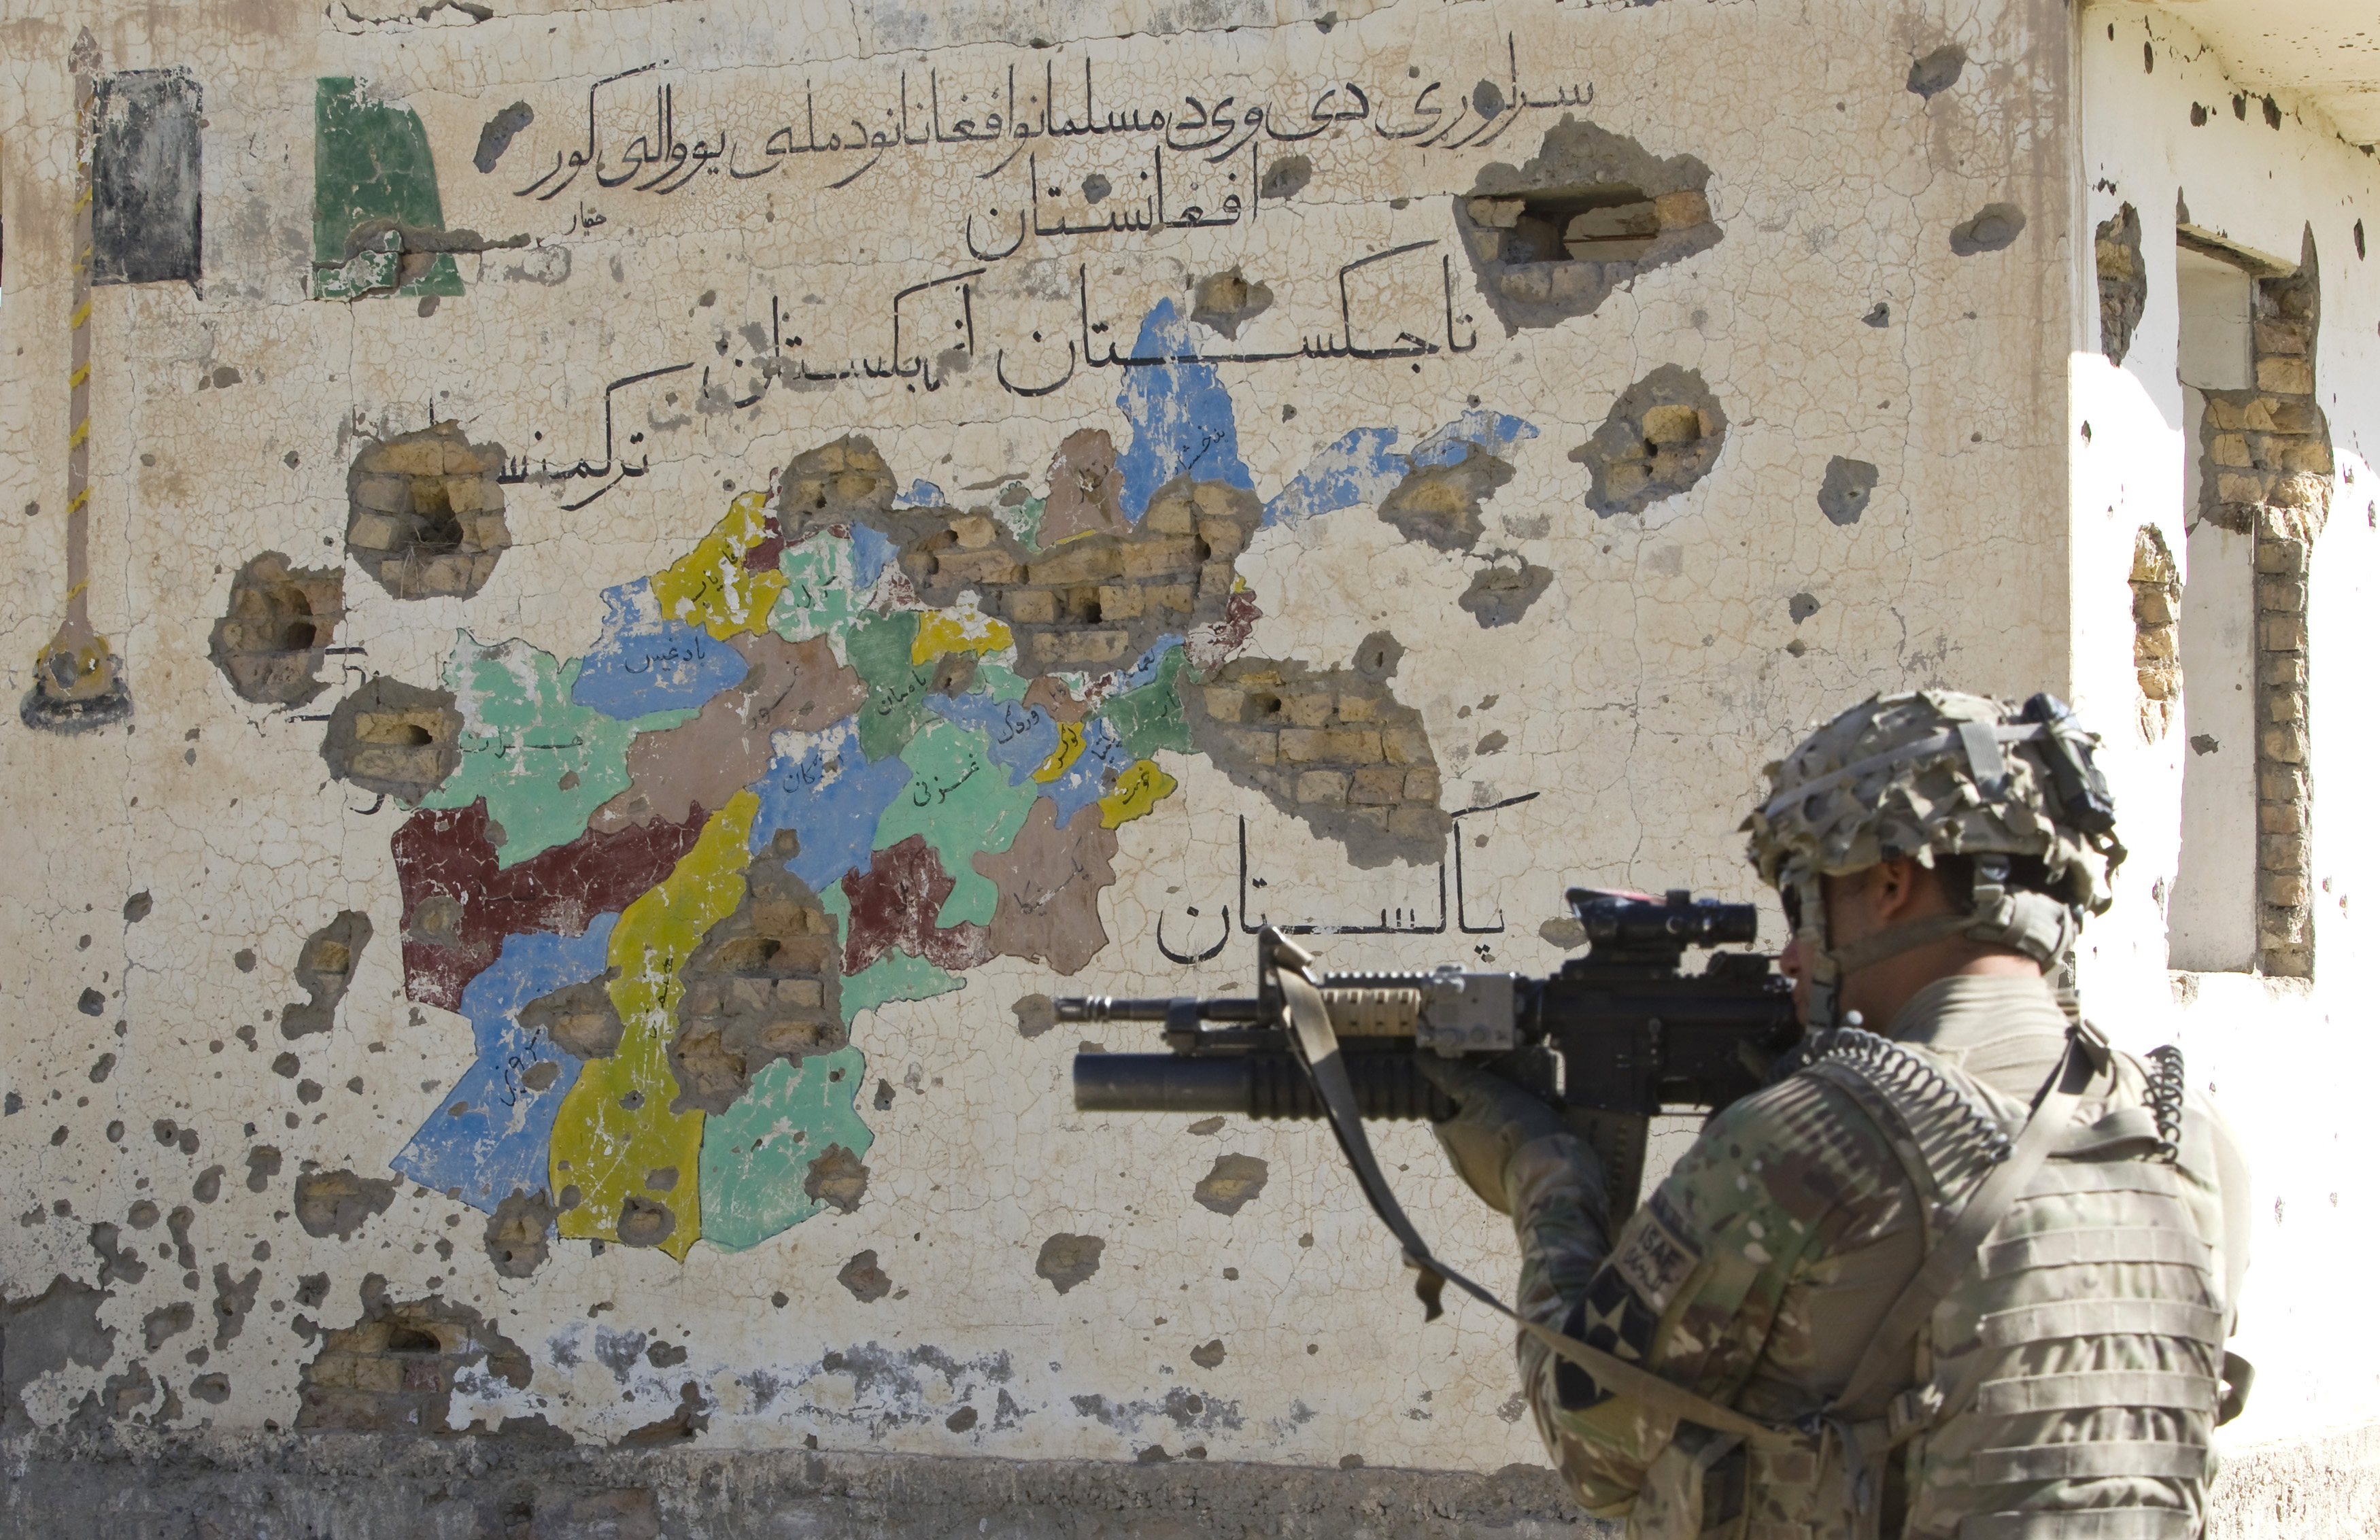 A U.S. Army soldier of 5-20 Infantry Regiment attached to 82nd Airborne Division, aims his rifle in front of a bullet riddled map of Afghanistan painted on a wall of an abandoned Canadian-built school in the Zharay district of Kandahar province, southern Afghanistan June 9, 2012.  REUTERS/Shamil Zhumatov  (AFGHANISTAN - Tags: MILITARY CIVIL UNREST POLITICS)